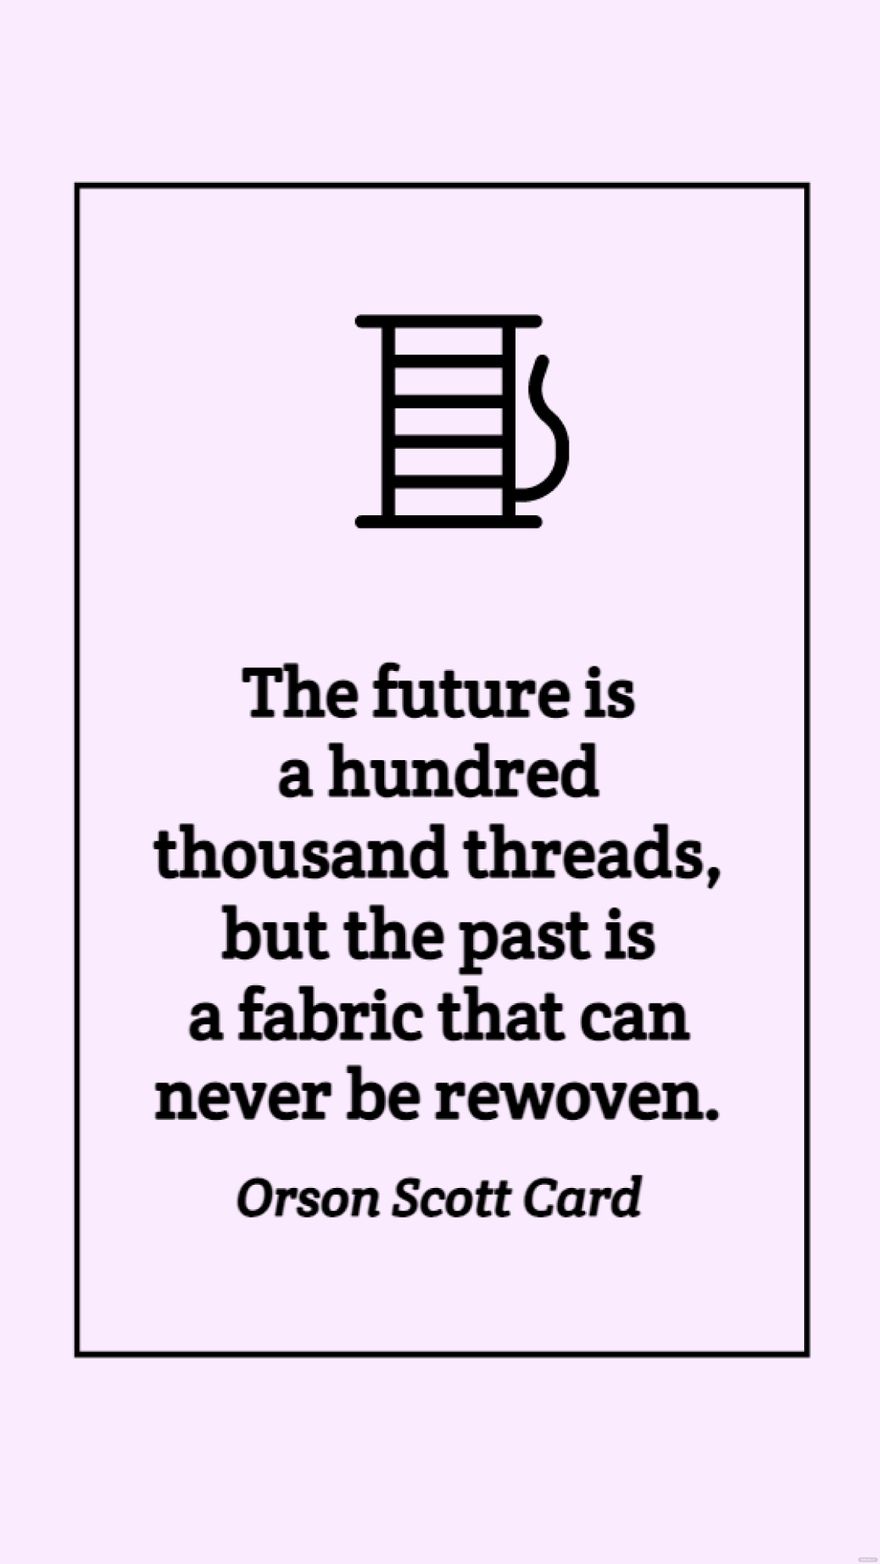 Orson Scott Card - The future is a hundred thousand threads, but the past is a fabric that can never be rewoven. in JPG